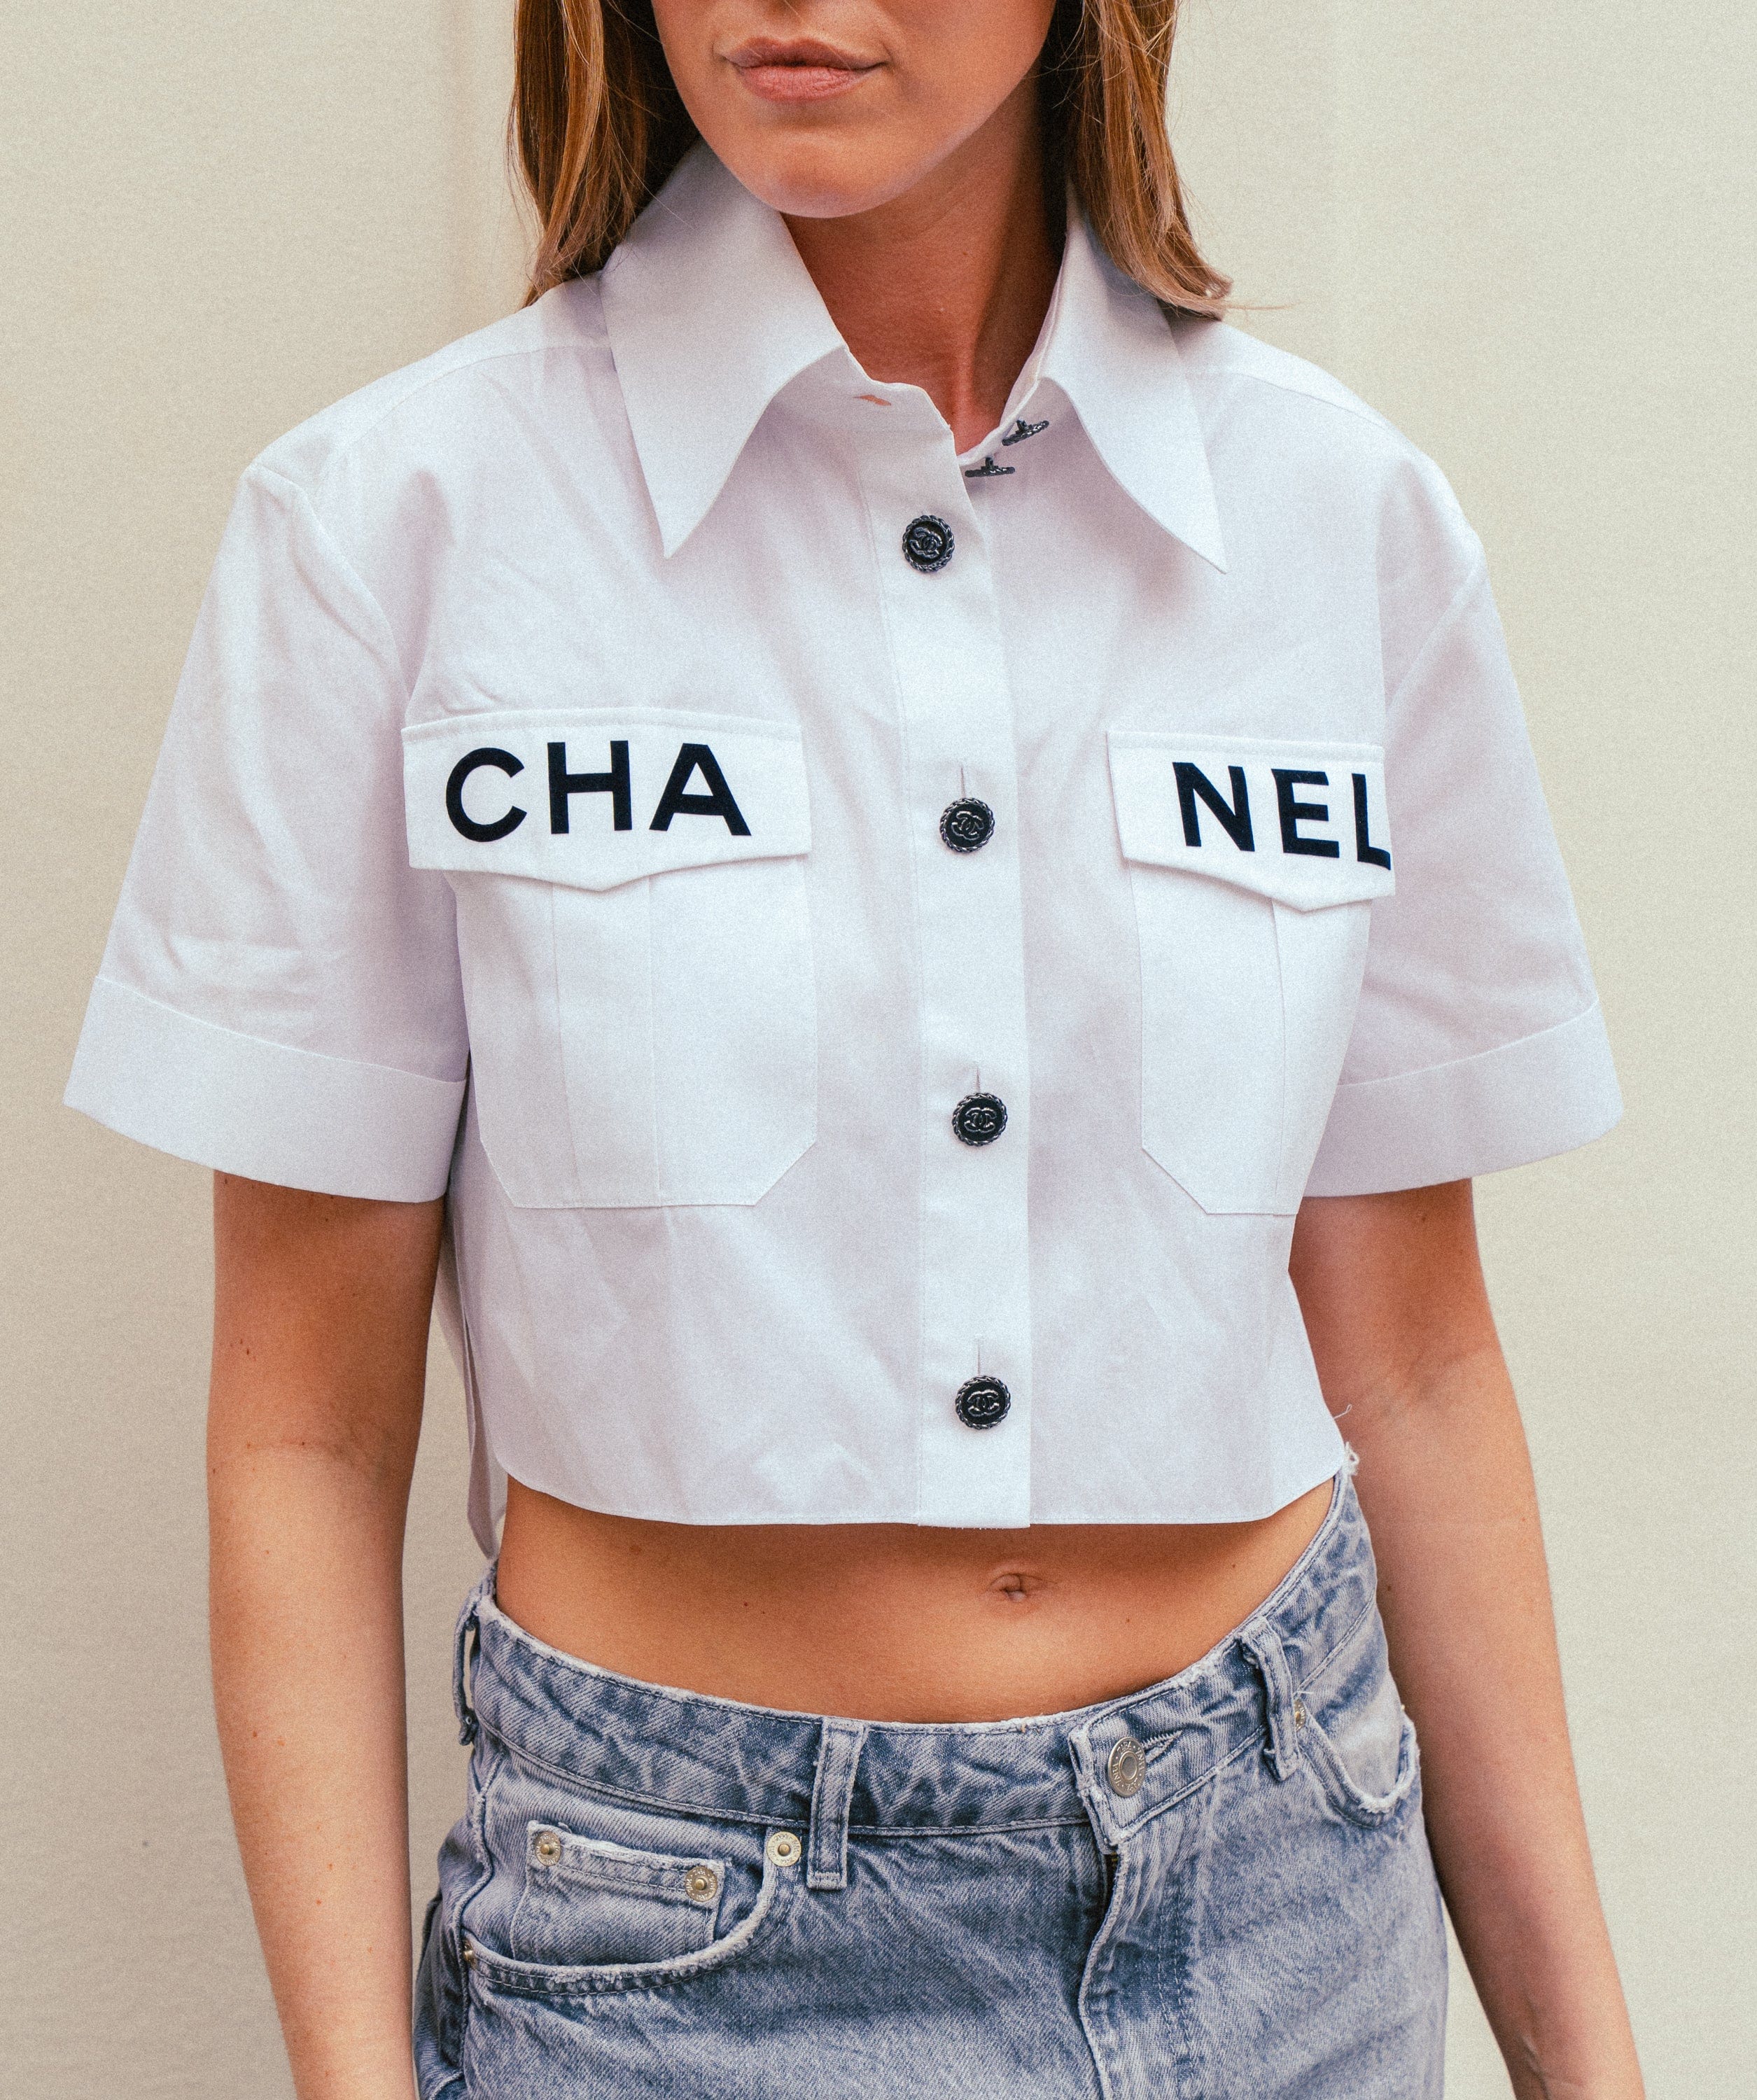 Chanel's $4,450 Embroidered F1 T-Shirt Is Taking Over the Internet